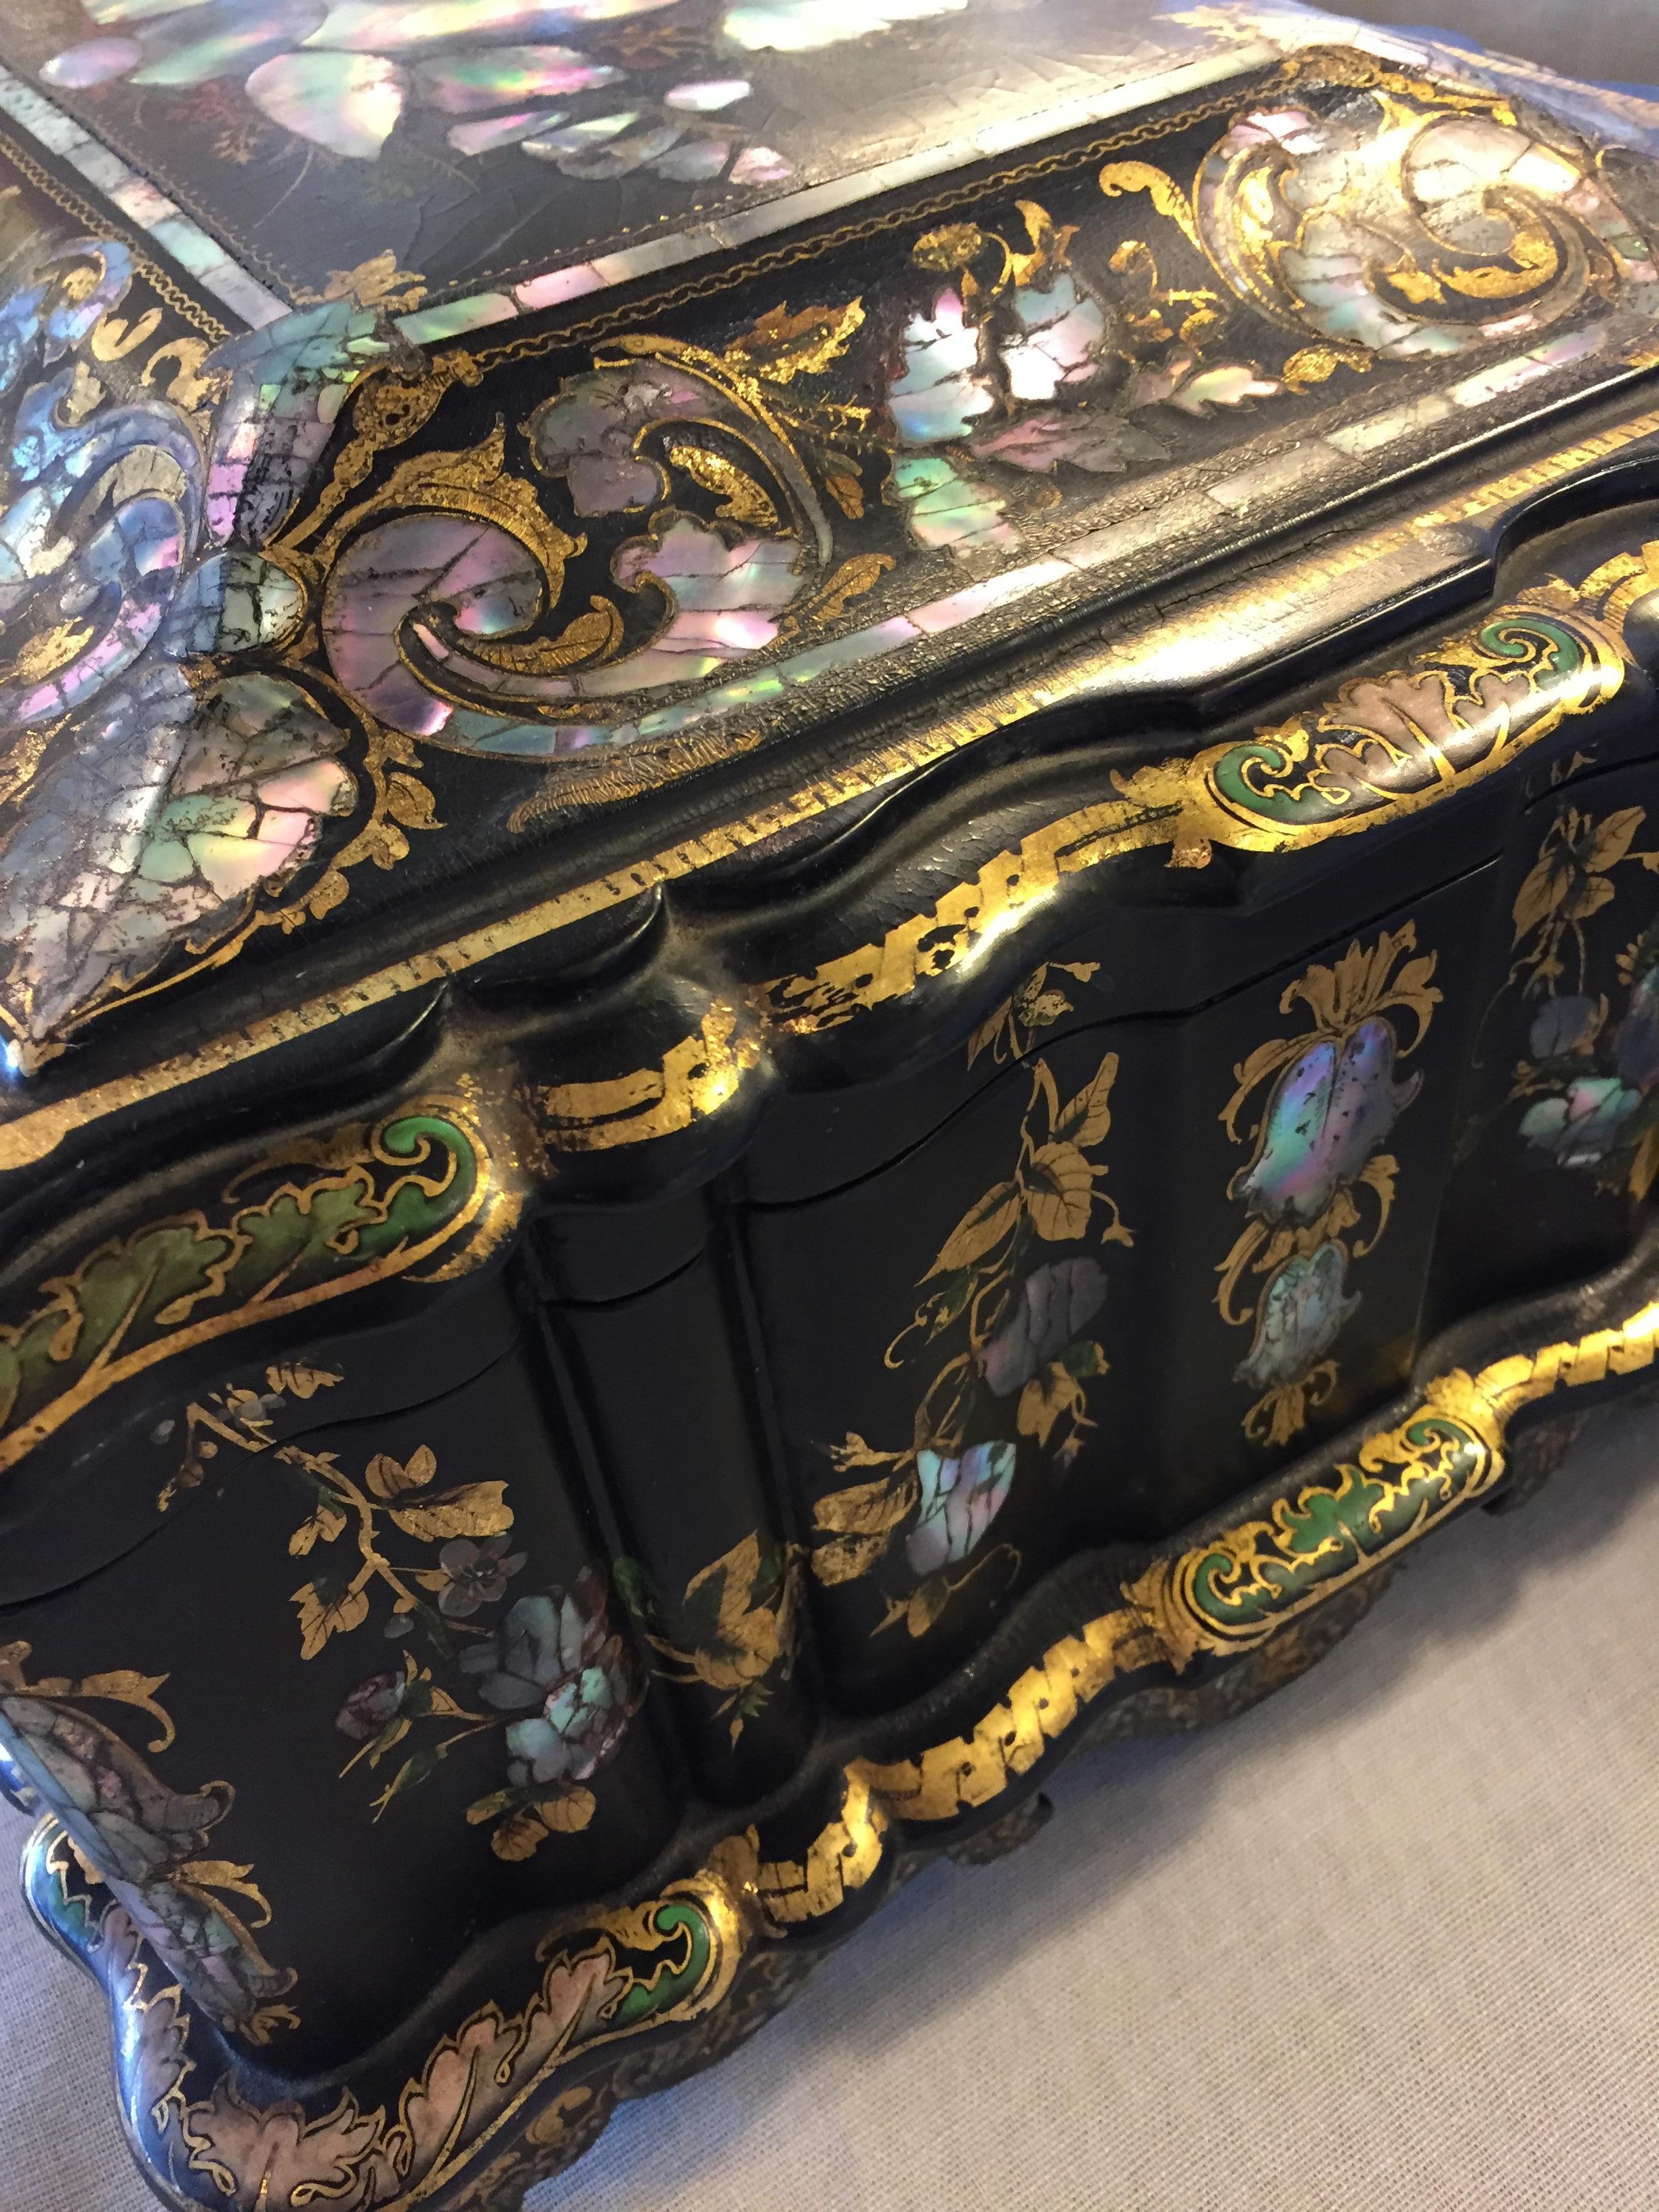 Gold Leaf Papier Mâché Massive Size Fine Quality 19th Century Sewing Box or Jewelry Box For Sale